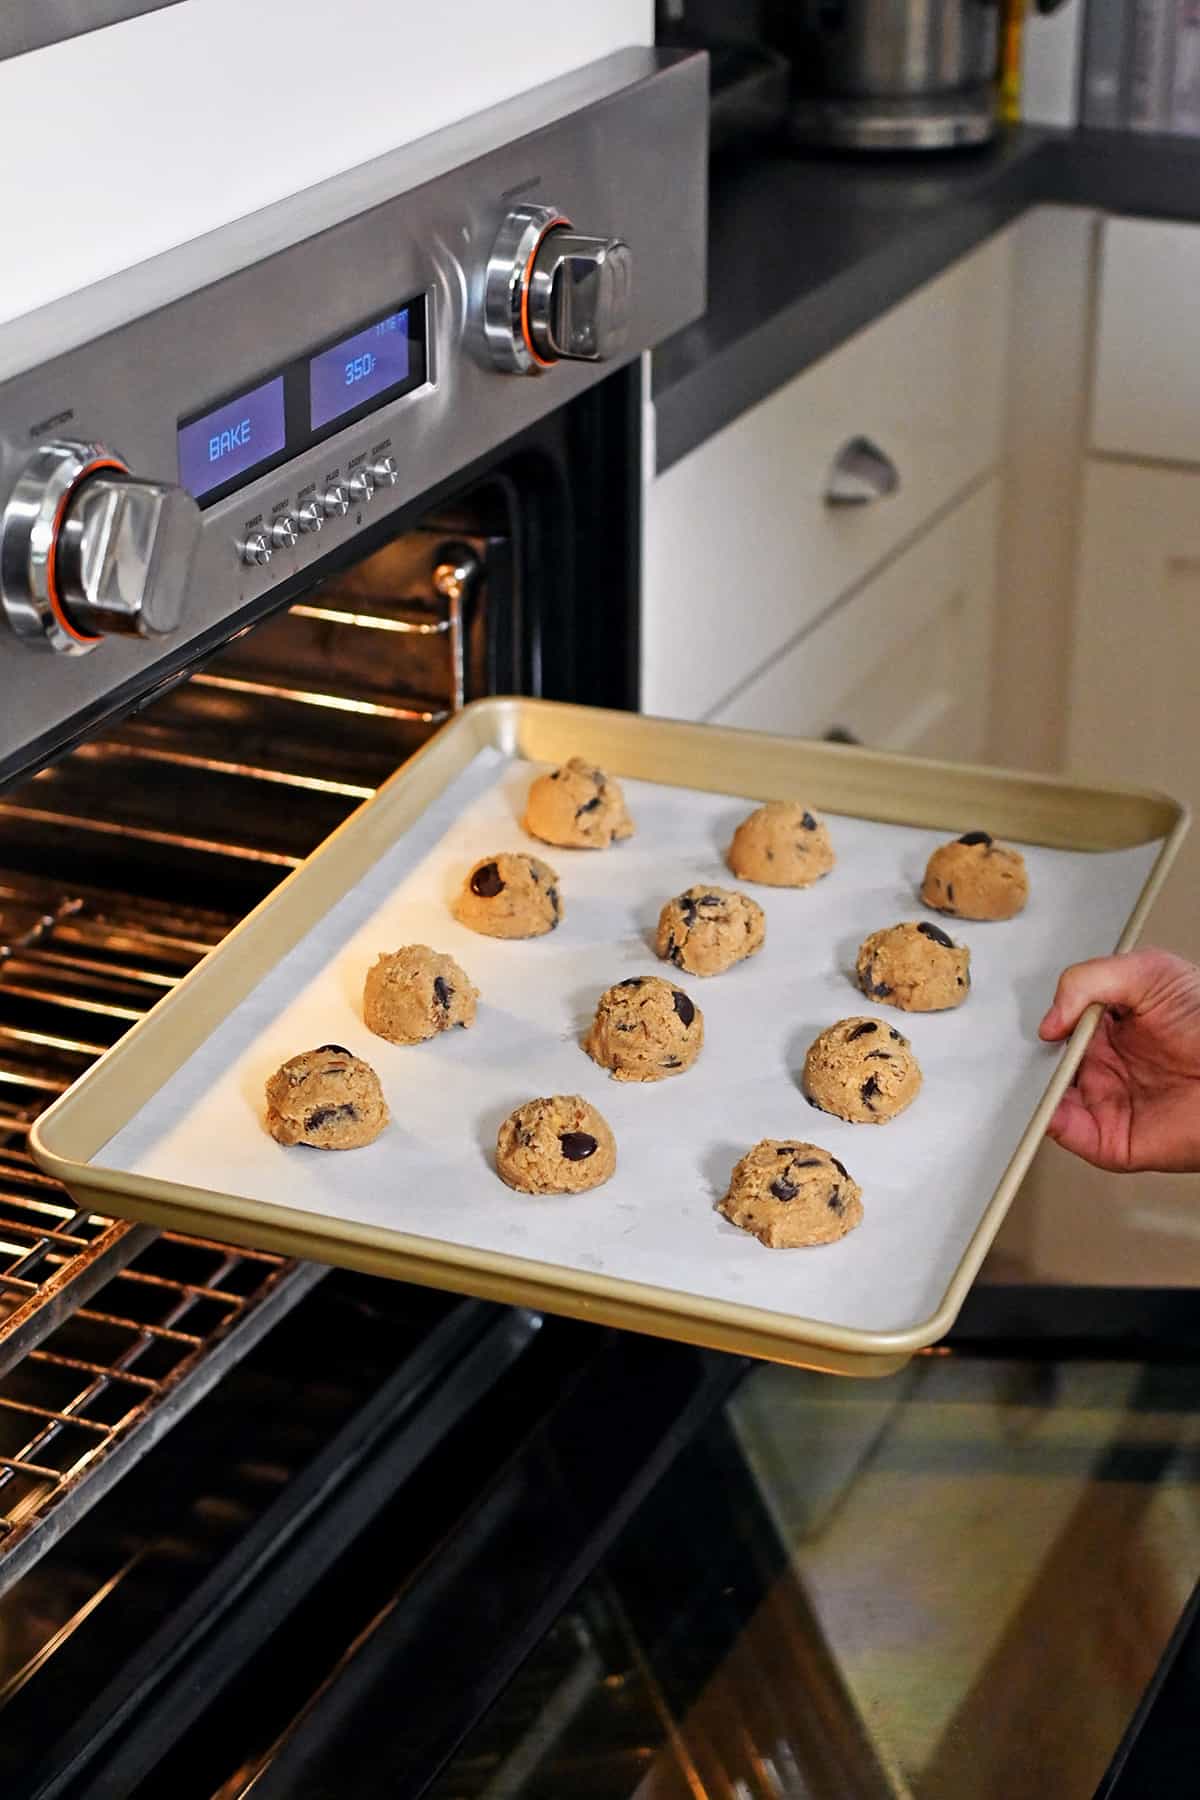 Placing a rimmed baking pan filled with banana cookie dough balls into an open oven to bake.